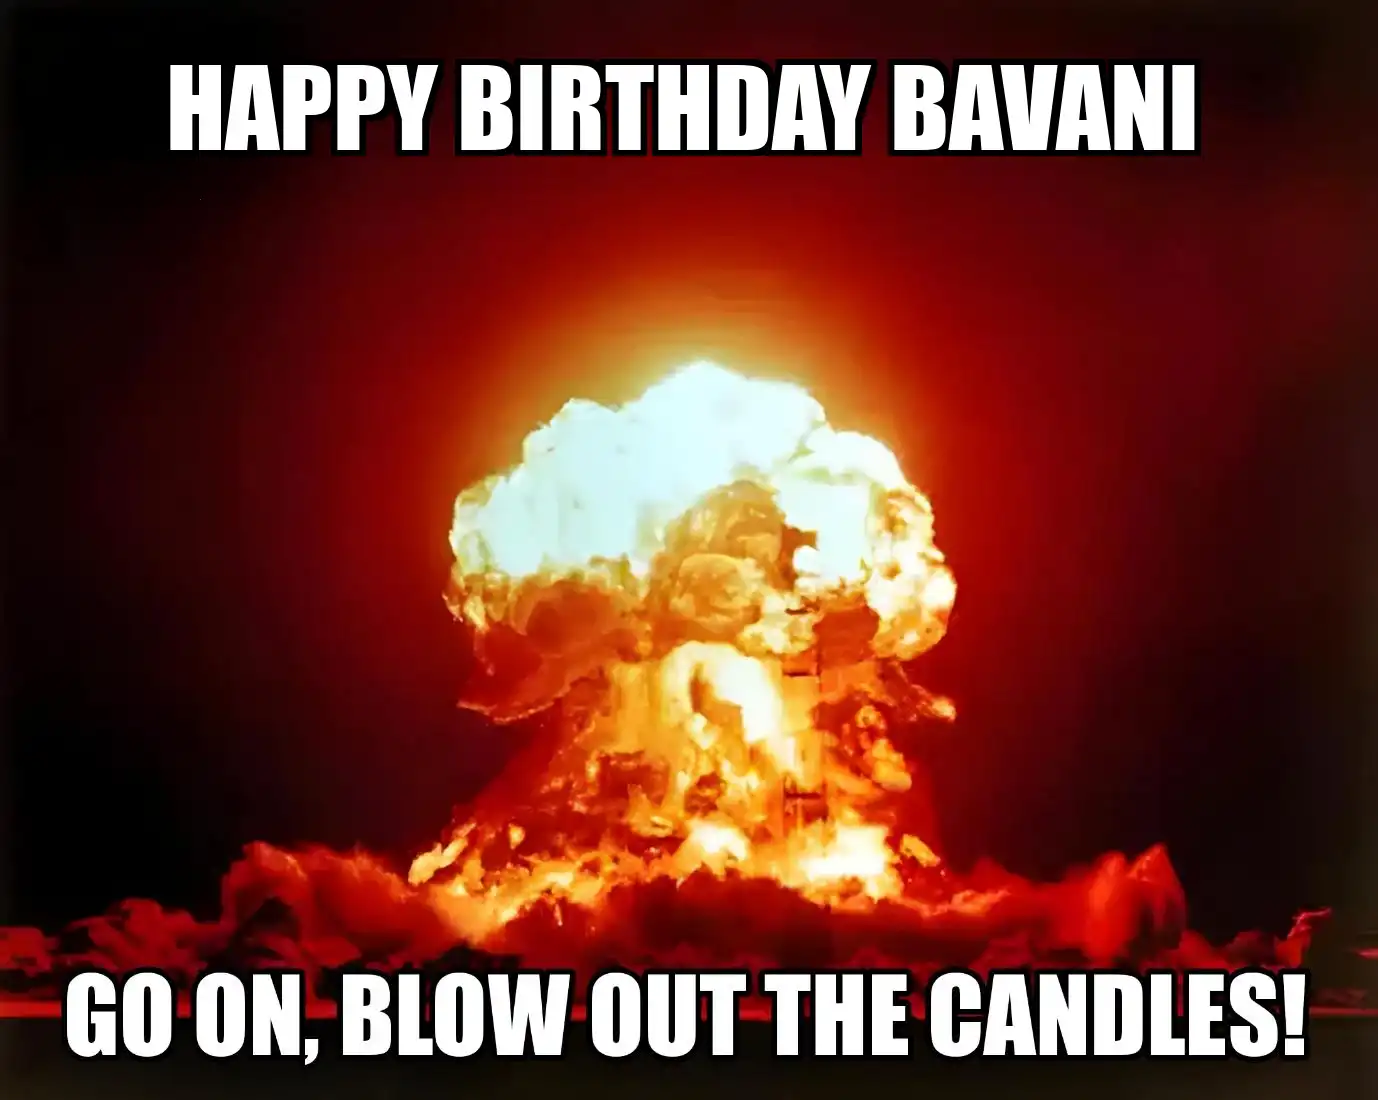 Happy Birthday Bavani Go On Blow Out The Candles Meme